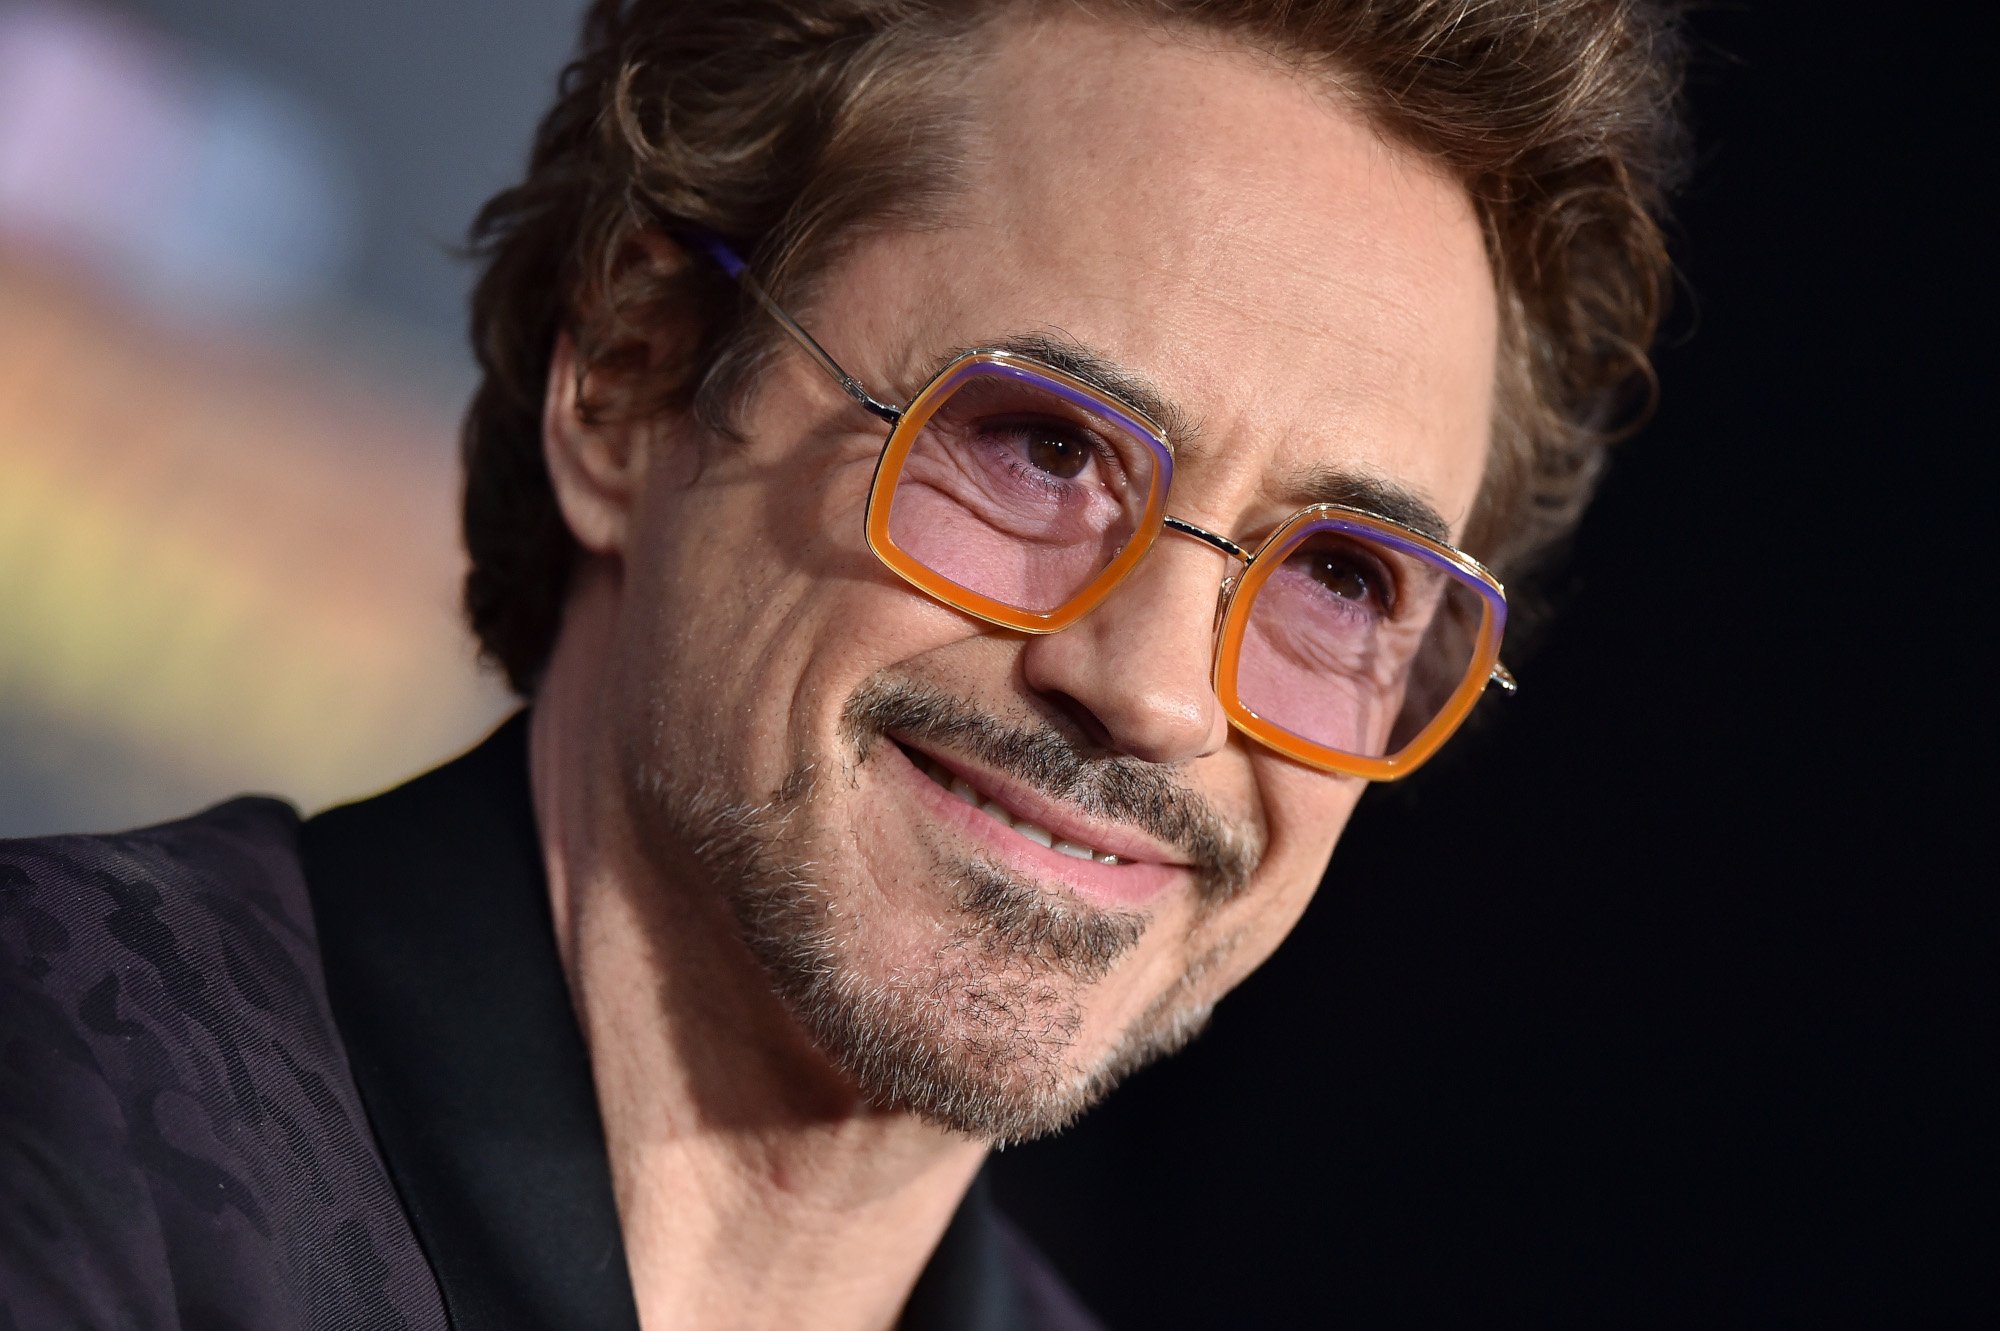 Iron Man star Robert Downey Jr. wearing orange-rimmed glasses with pink tinted lenses and smiling